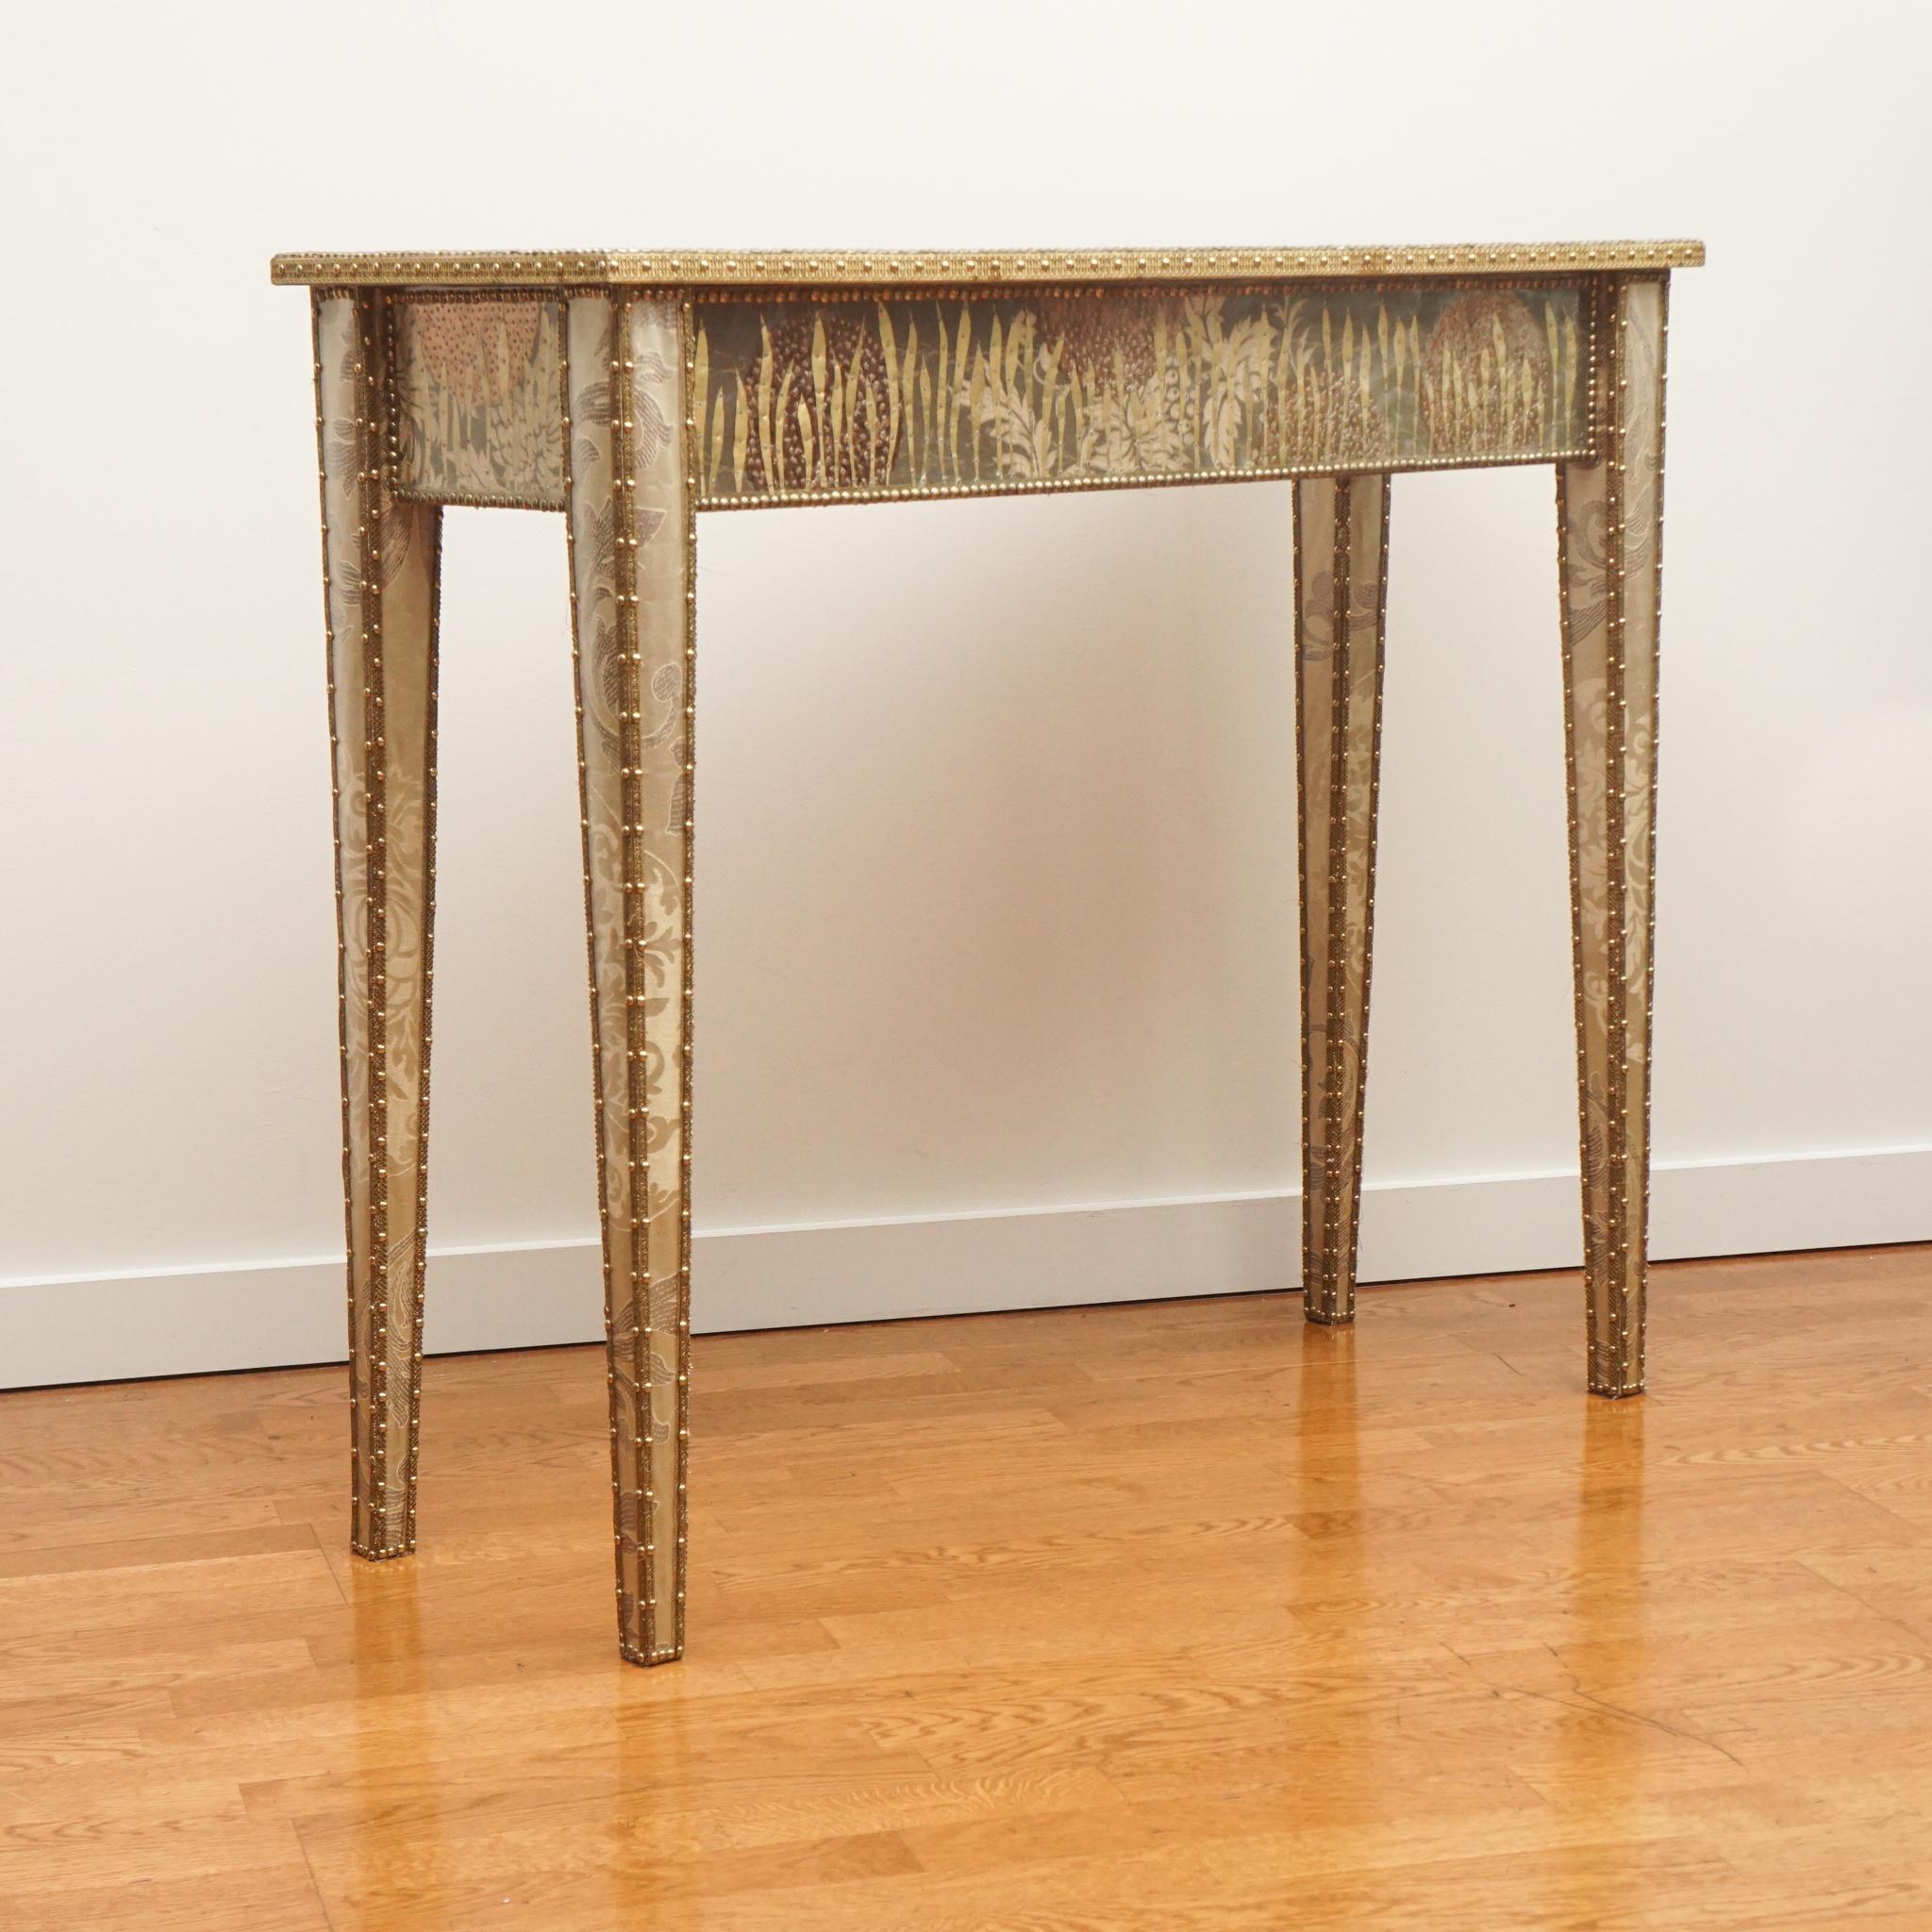 The Sutra console table is made of wood and covered with luxury fabric that is then hand decorated by Valentina Giovando with brass trimmings, large-round decorations made of brass and copper foil, sequins and hand-cut brass leaves. A final layer of